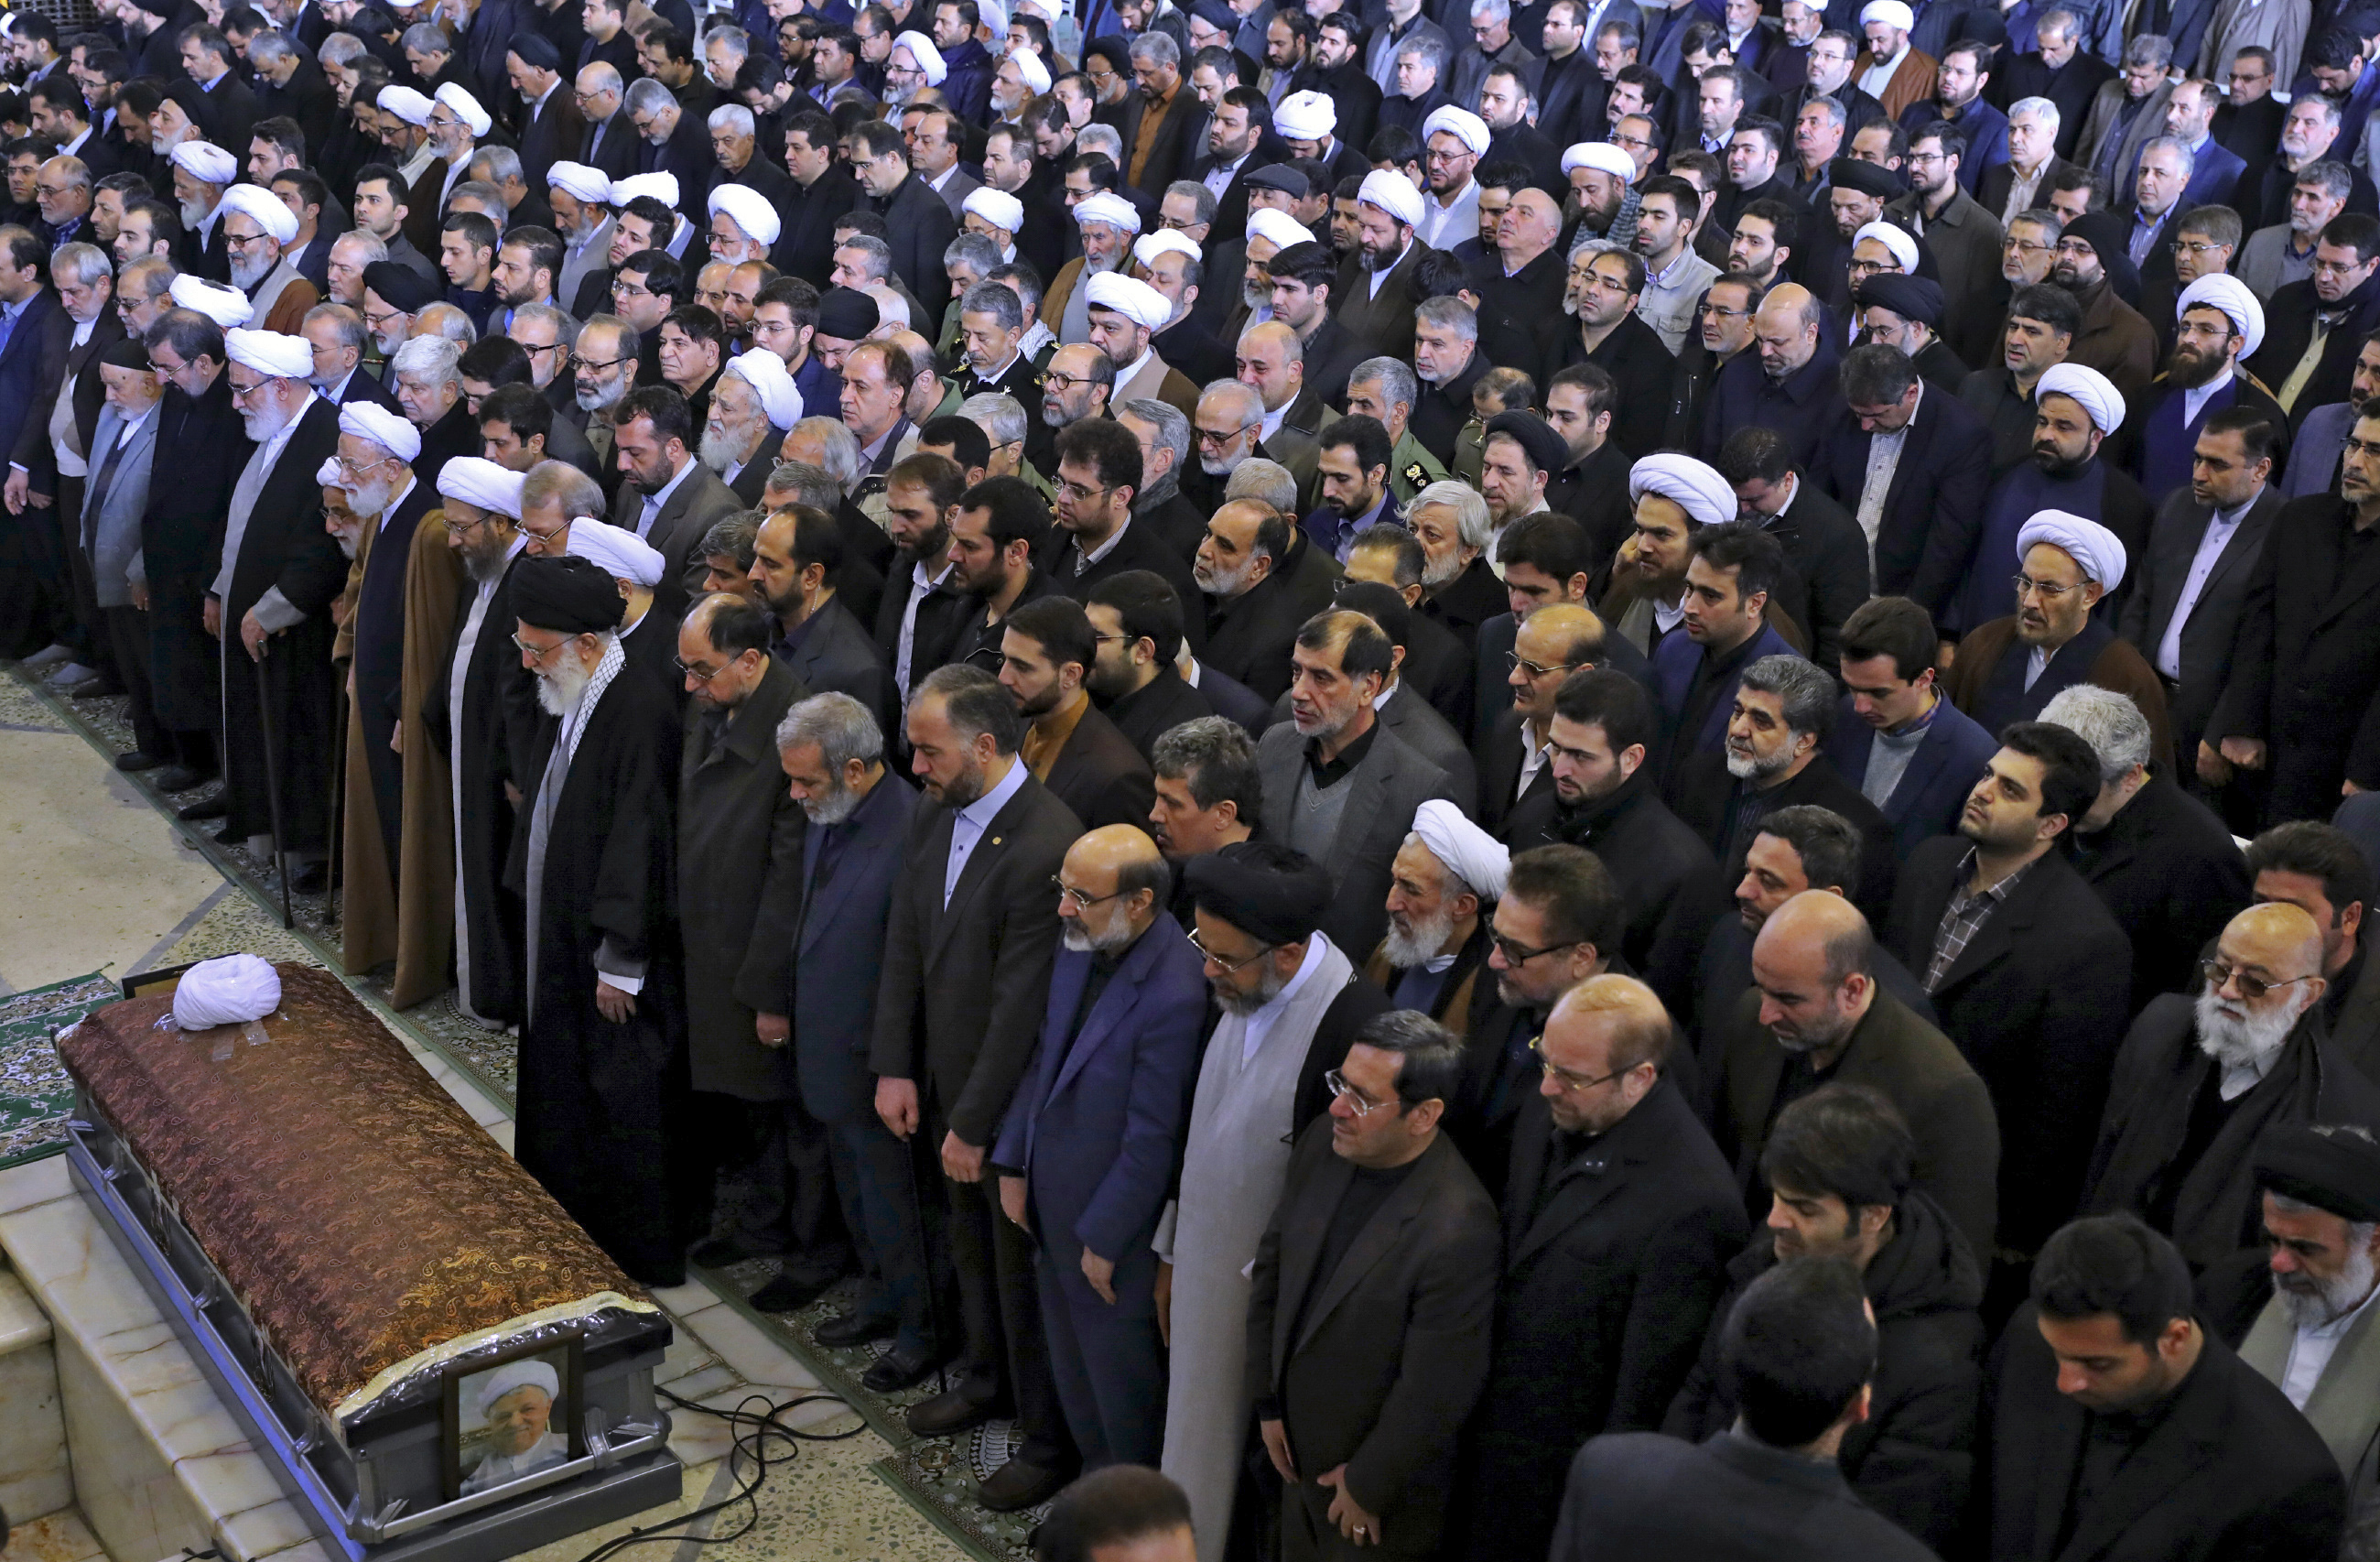 In this picture released by an official website of the office of the Iranian supreme leader, Supreme Leader Ayatollah Ali Khamenei, left foreground, leads a prayer over the casket of former Iranian  President Akbar Hashemi Rafsanjani, with top government and clerical officials, at the Tehran University campus in Tehran, Iran, Tuesday, Jan. 10, 2017. Hundreds of thousands of mourners have flooded the streets of Tehran, beating their chests and wailing in grief for Rafsanjani, who died over the weekend at the age of 82. The crowds have filled main thoroughfares of the capital as top government and clerical officials held a funeral service at Tehran University. (Office of the Iranian Supreme Leader via AP)